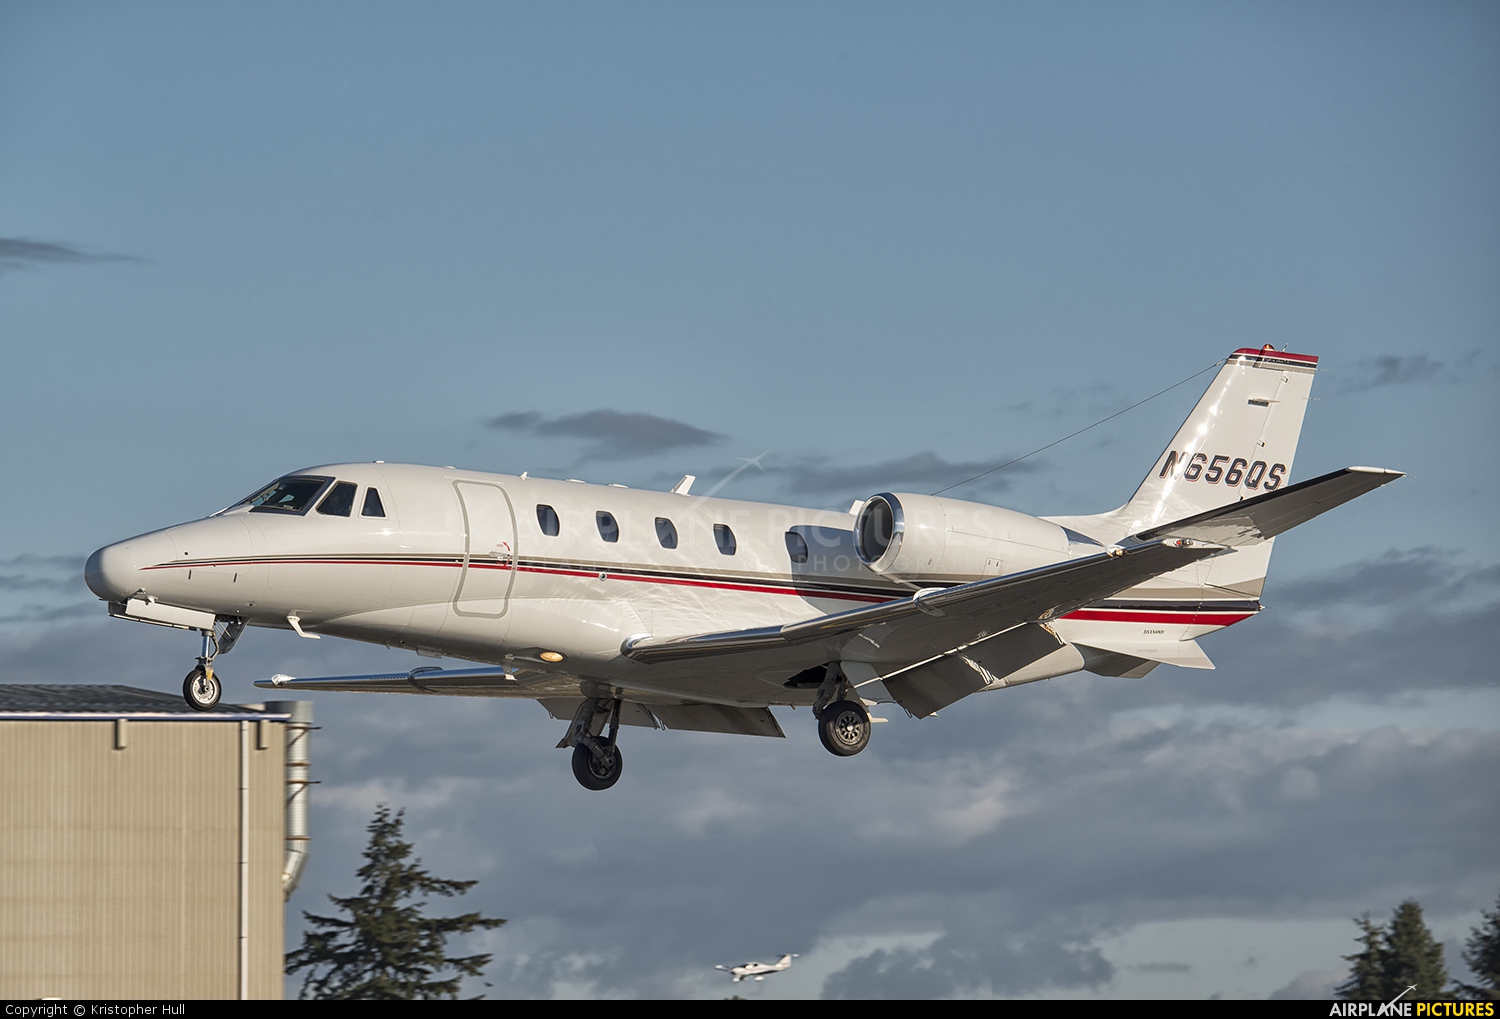 Netjets (USA) N656QS aircraft at Everett - Snohomish County / Paine Field